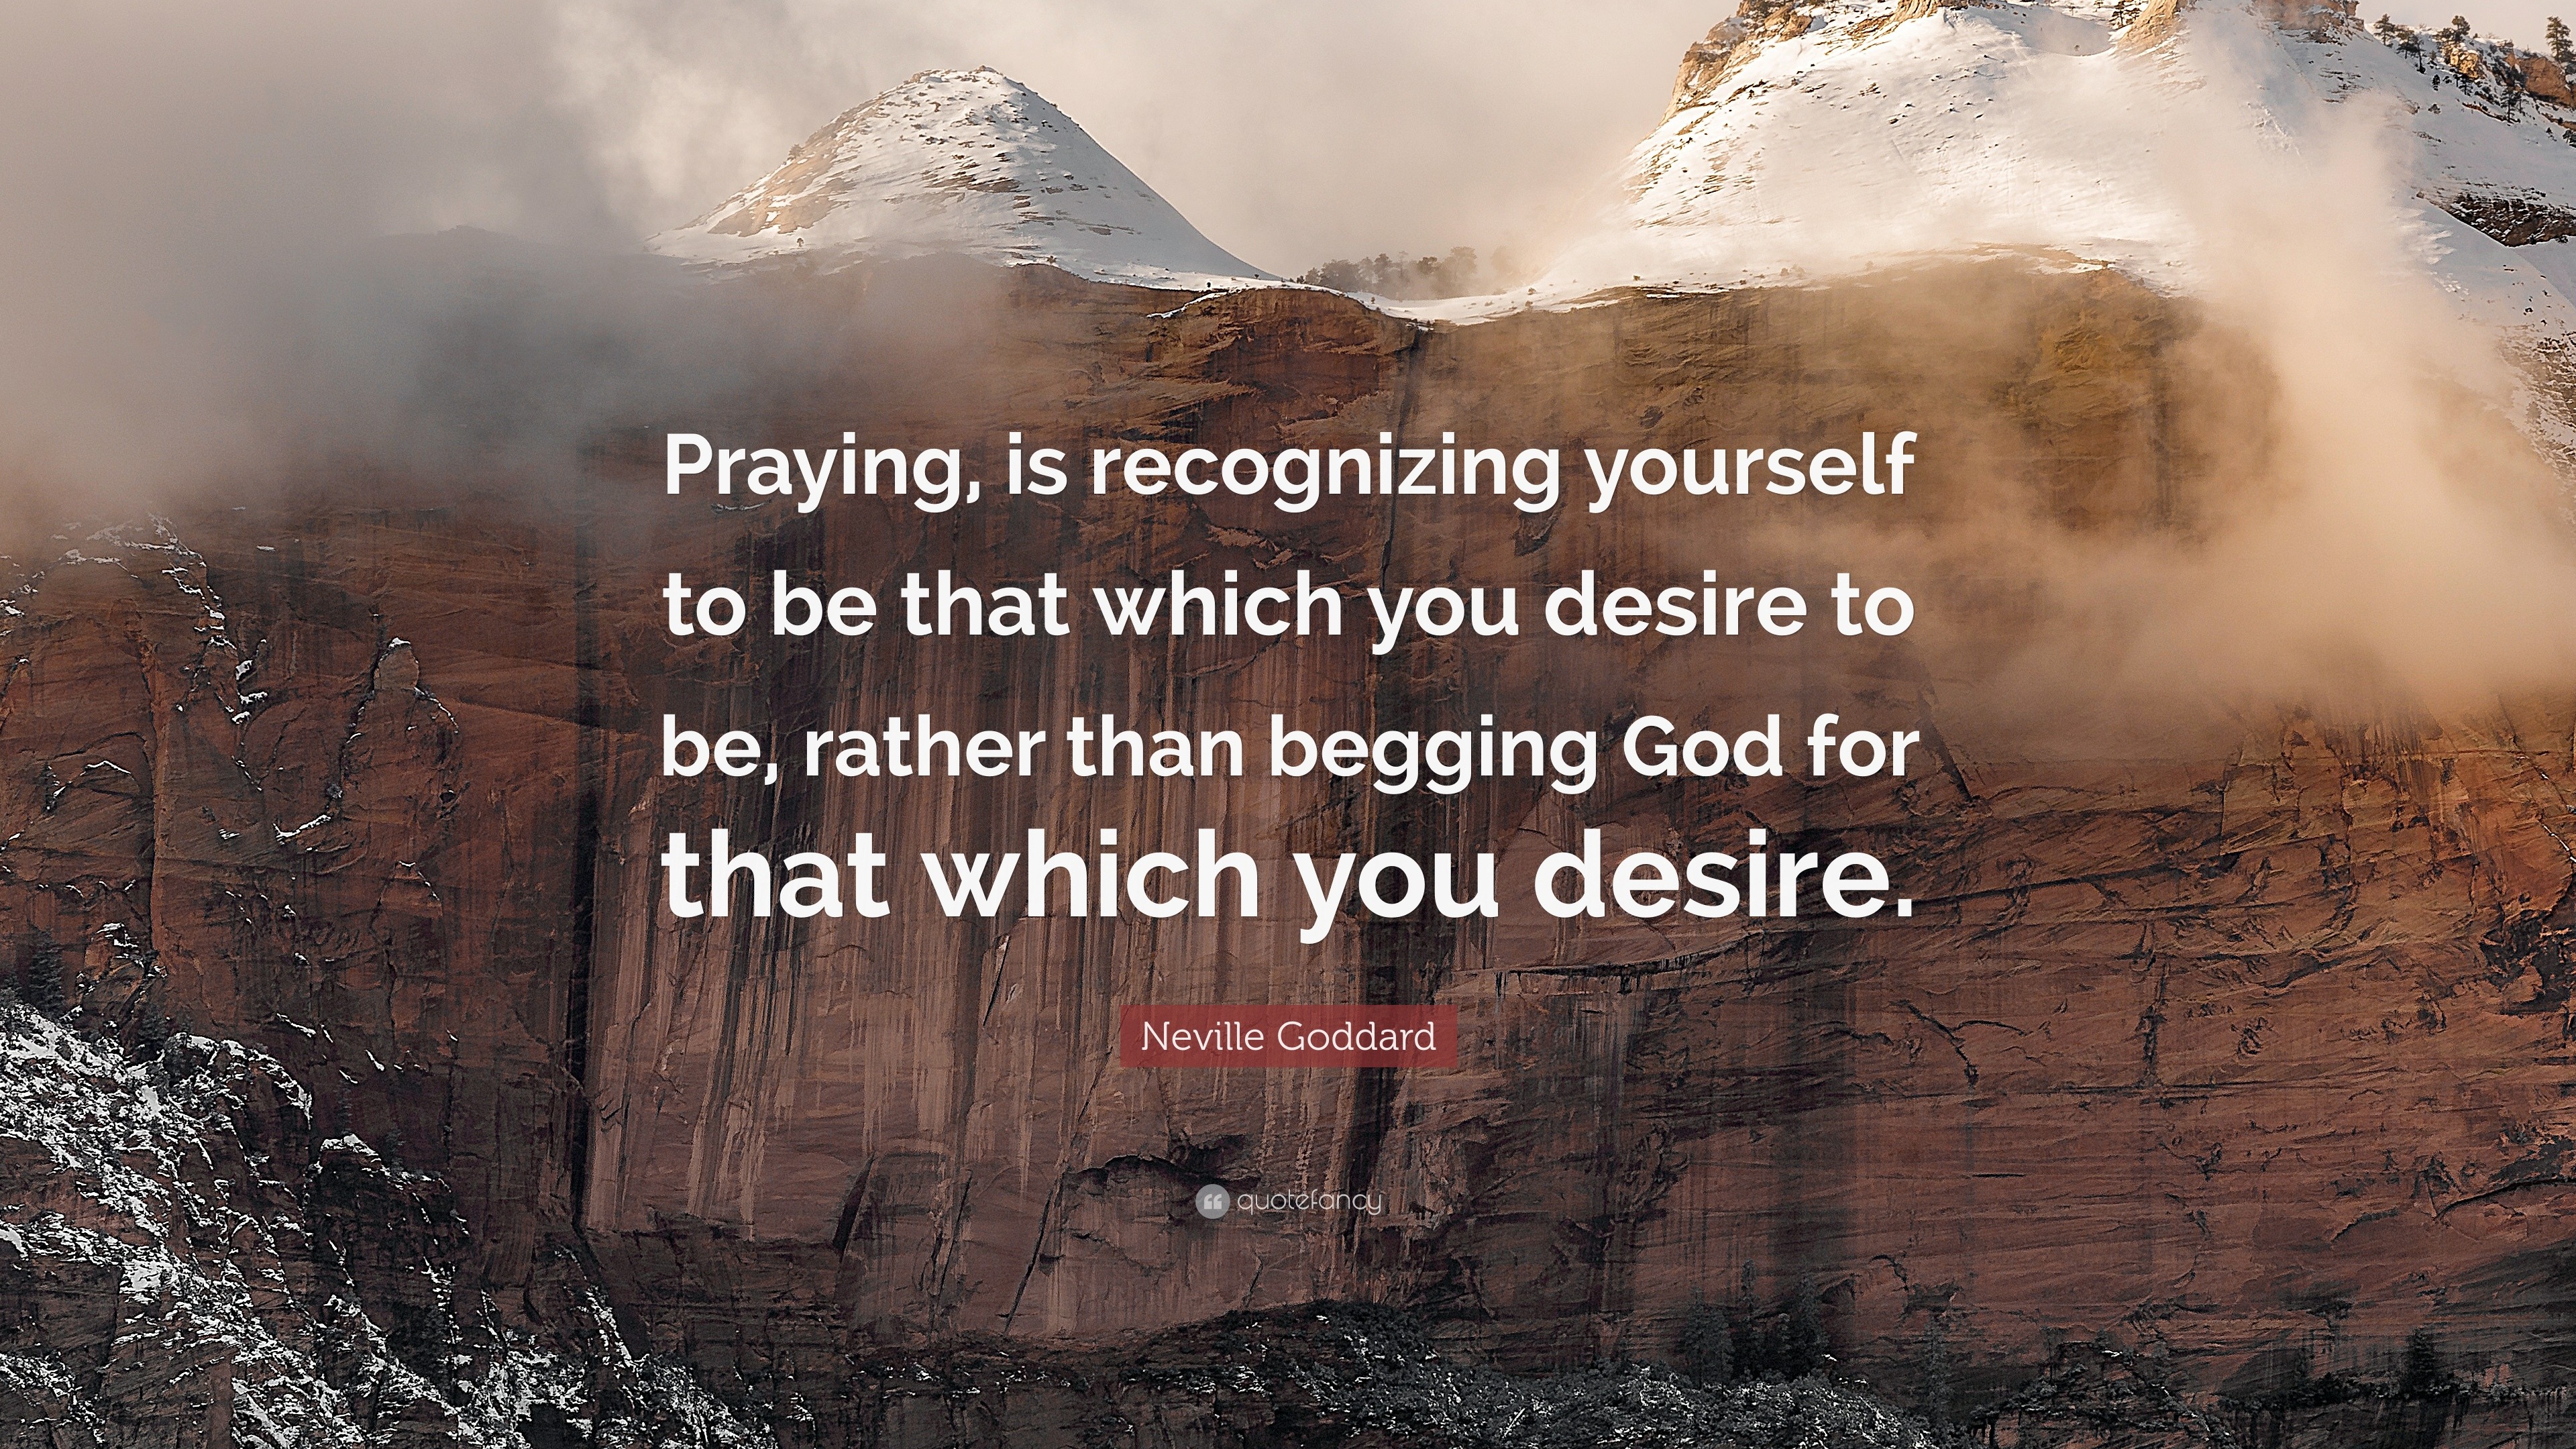 Neville Goddard Quote: “Praying, is recognizing yourself to be that which  you desire to be, rather